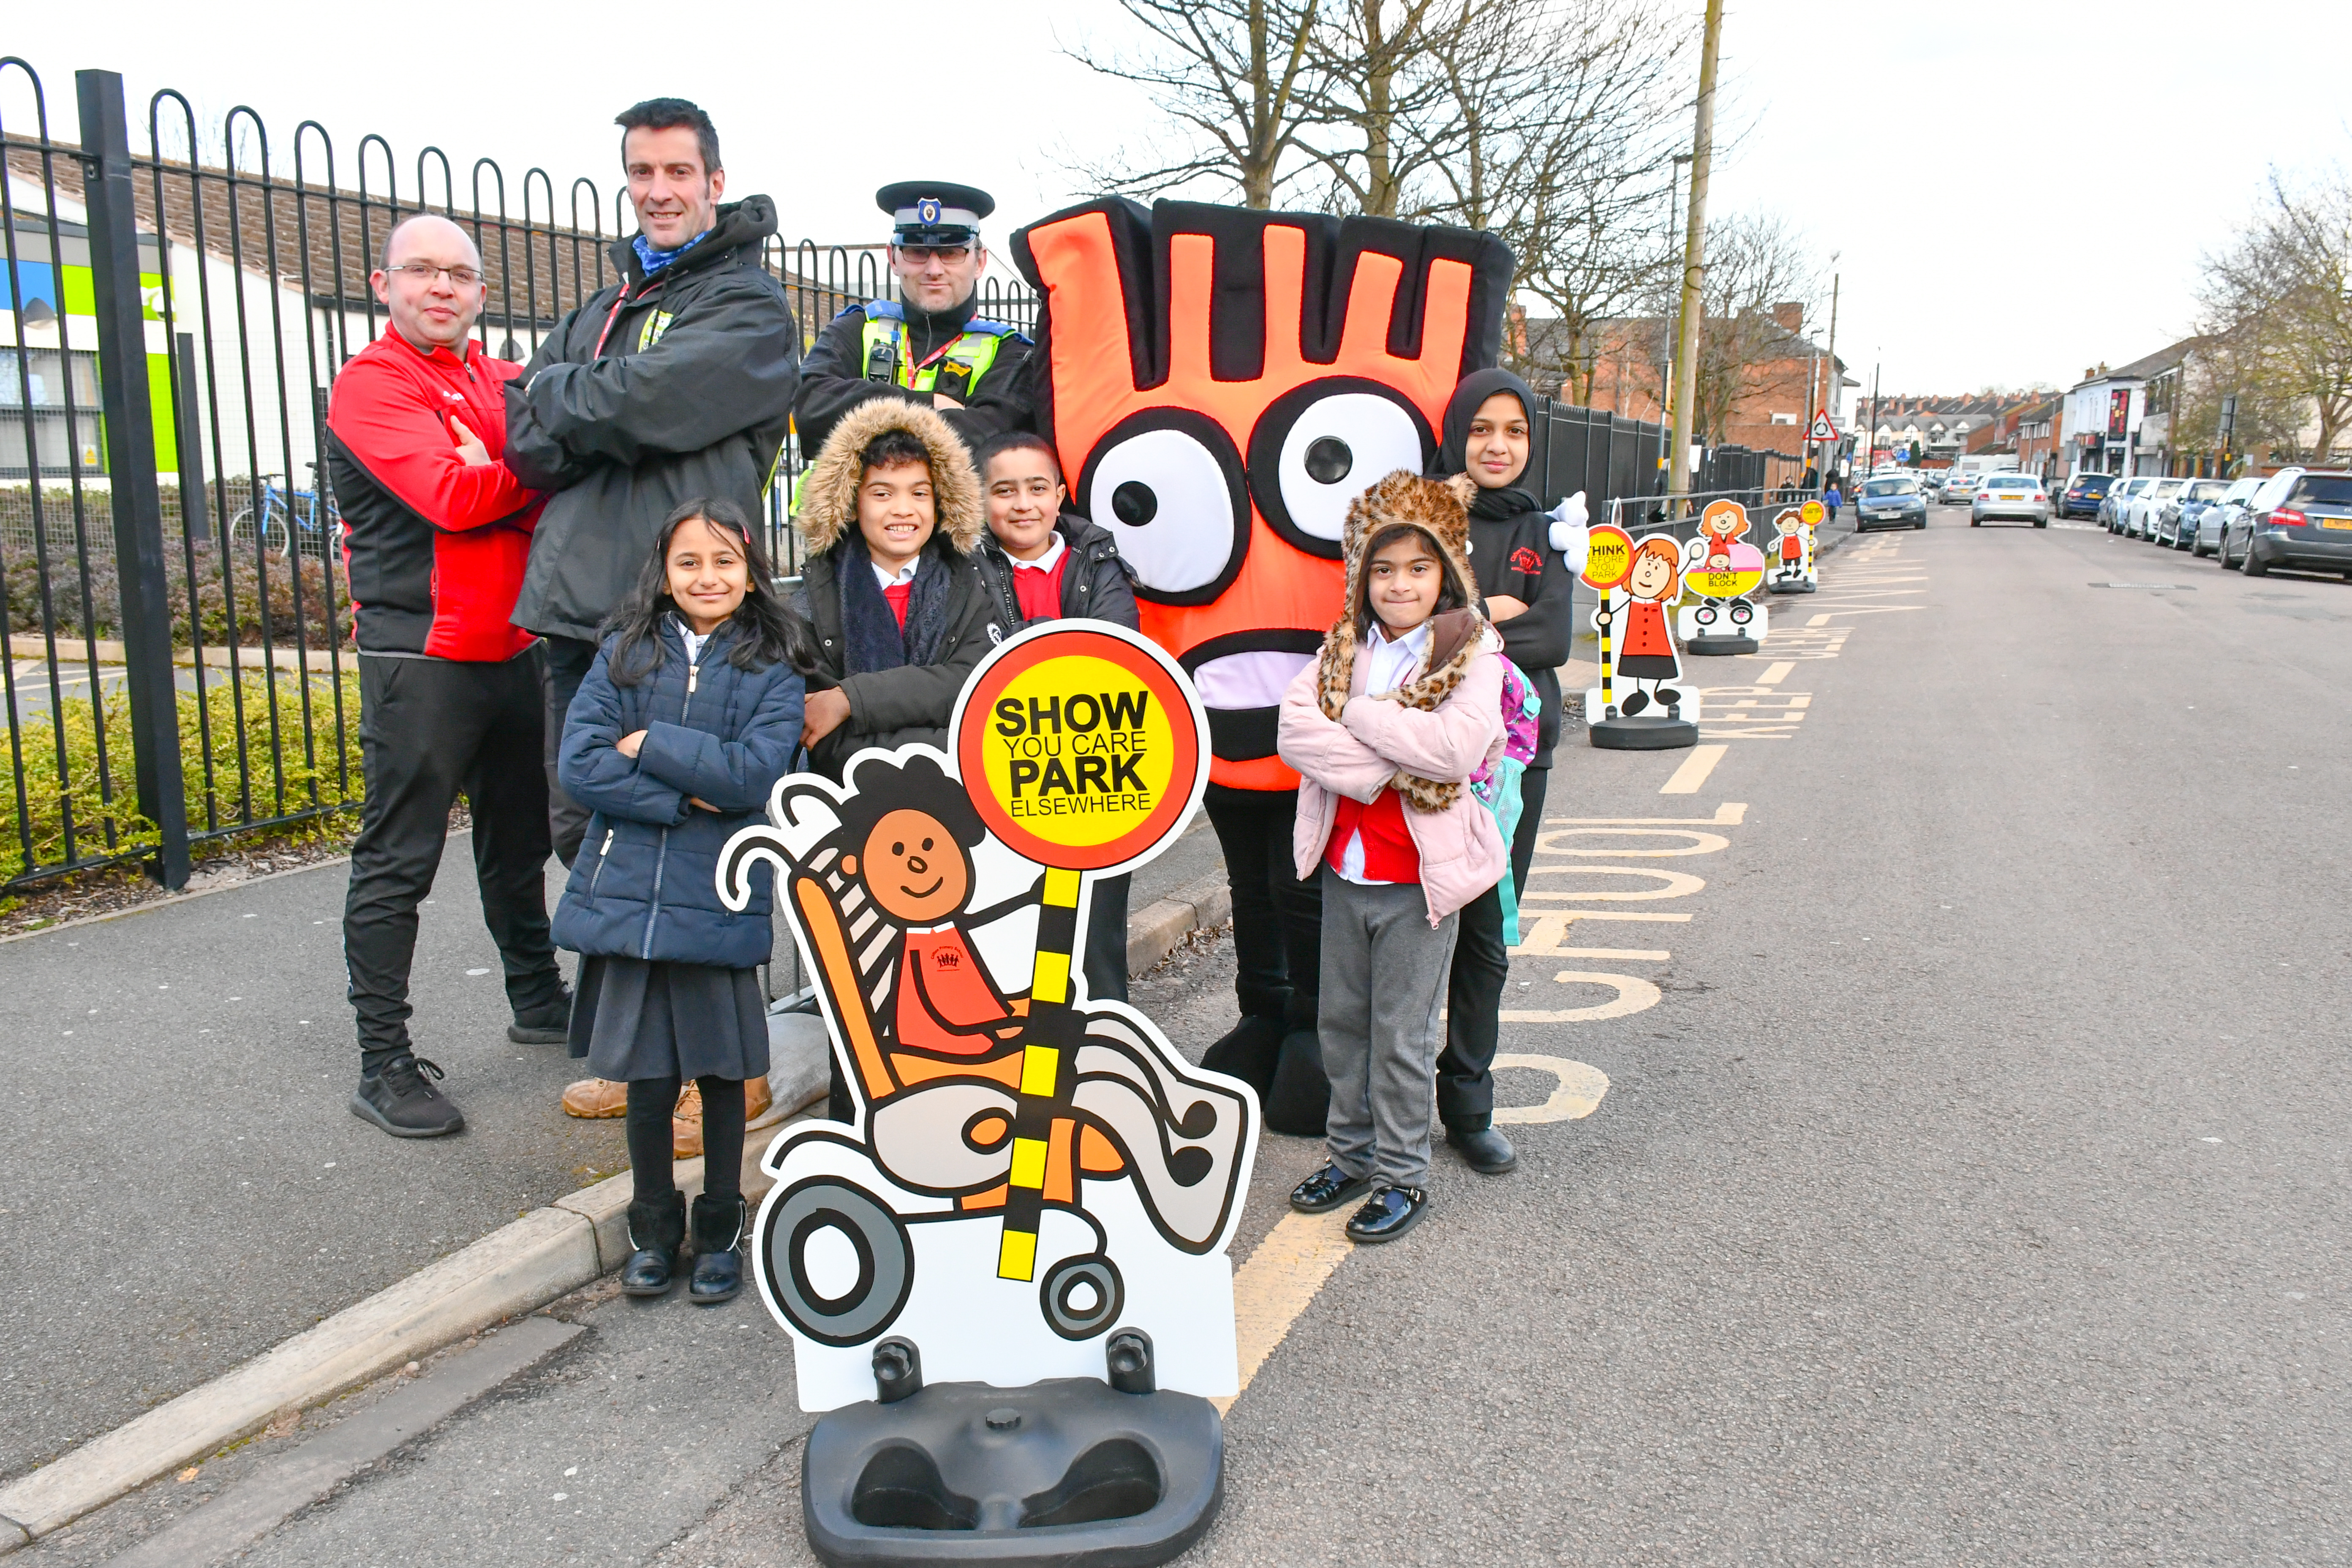 Ed Wicks of Living Streets, Owen Lamprey of Clifton Primary School and PSCO Richard Evans with pupils celebrate the arrival of the new parking buddies